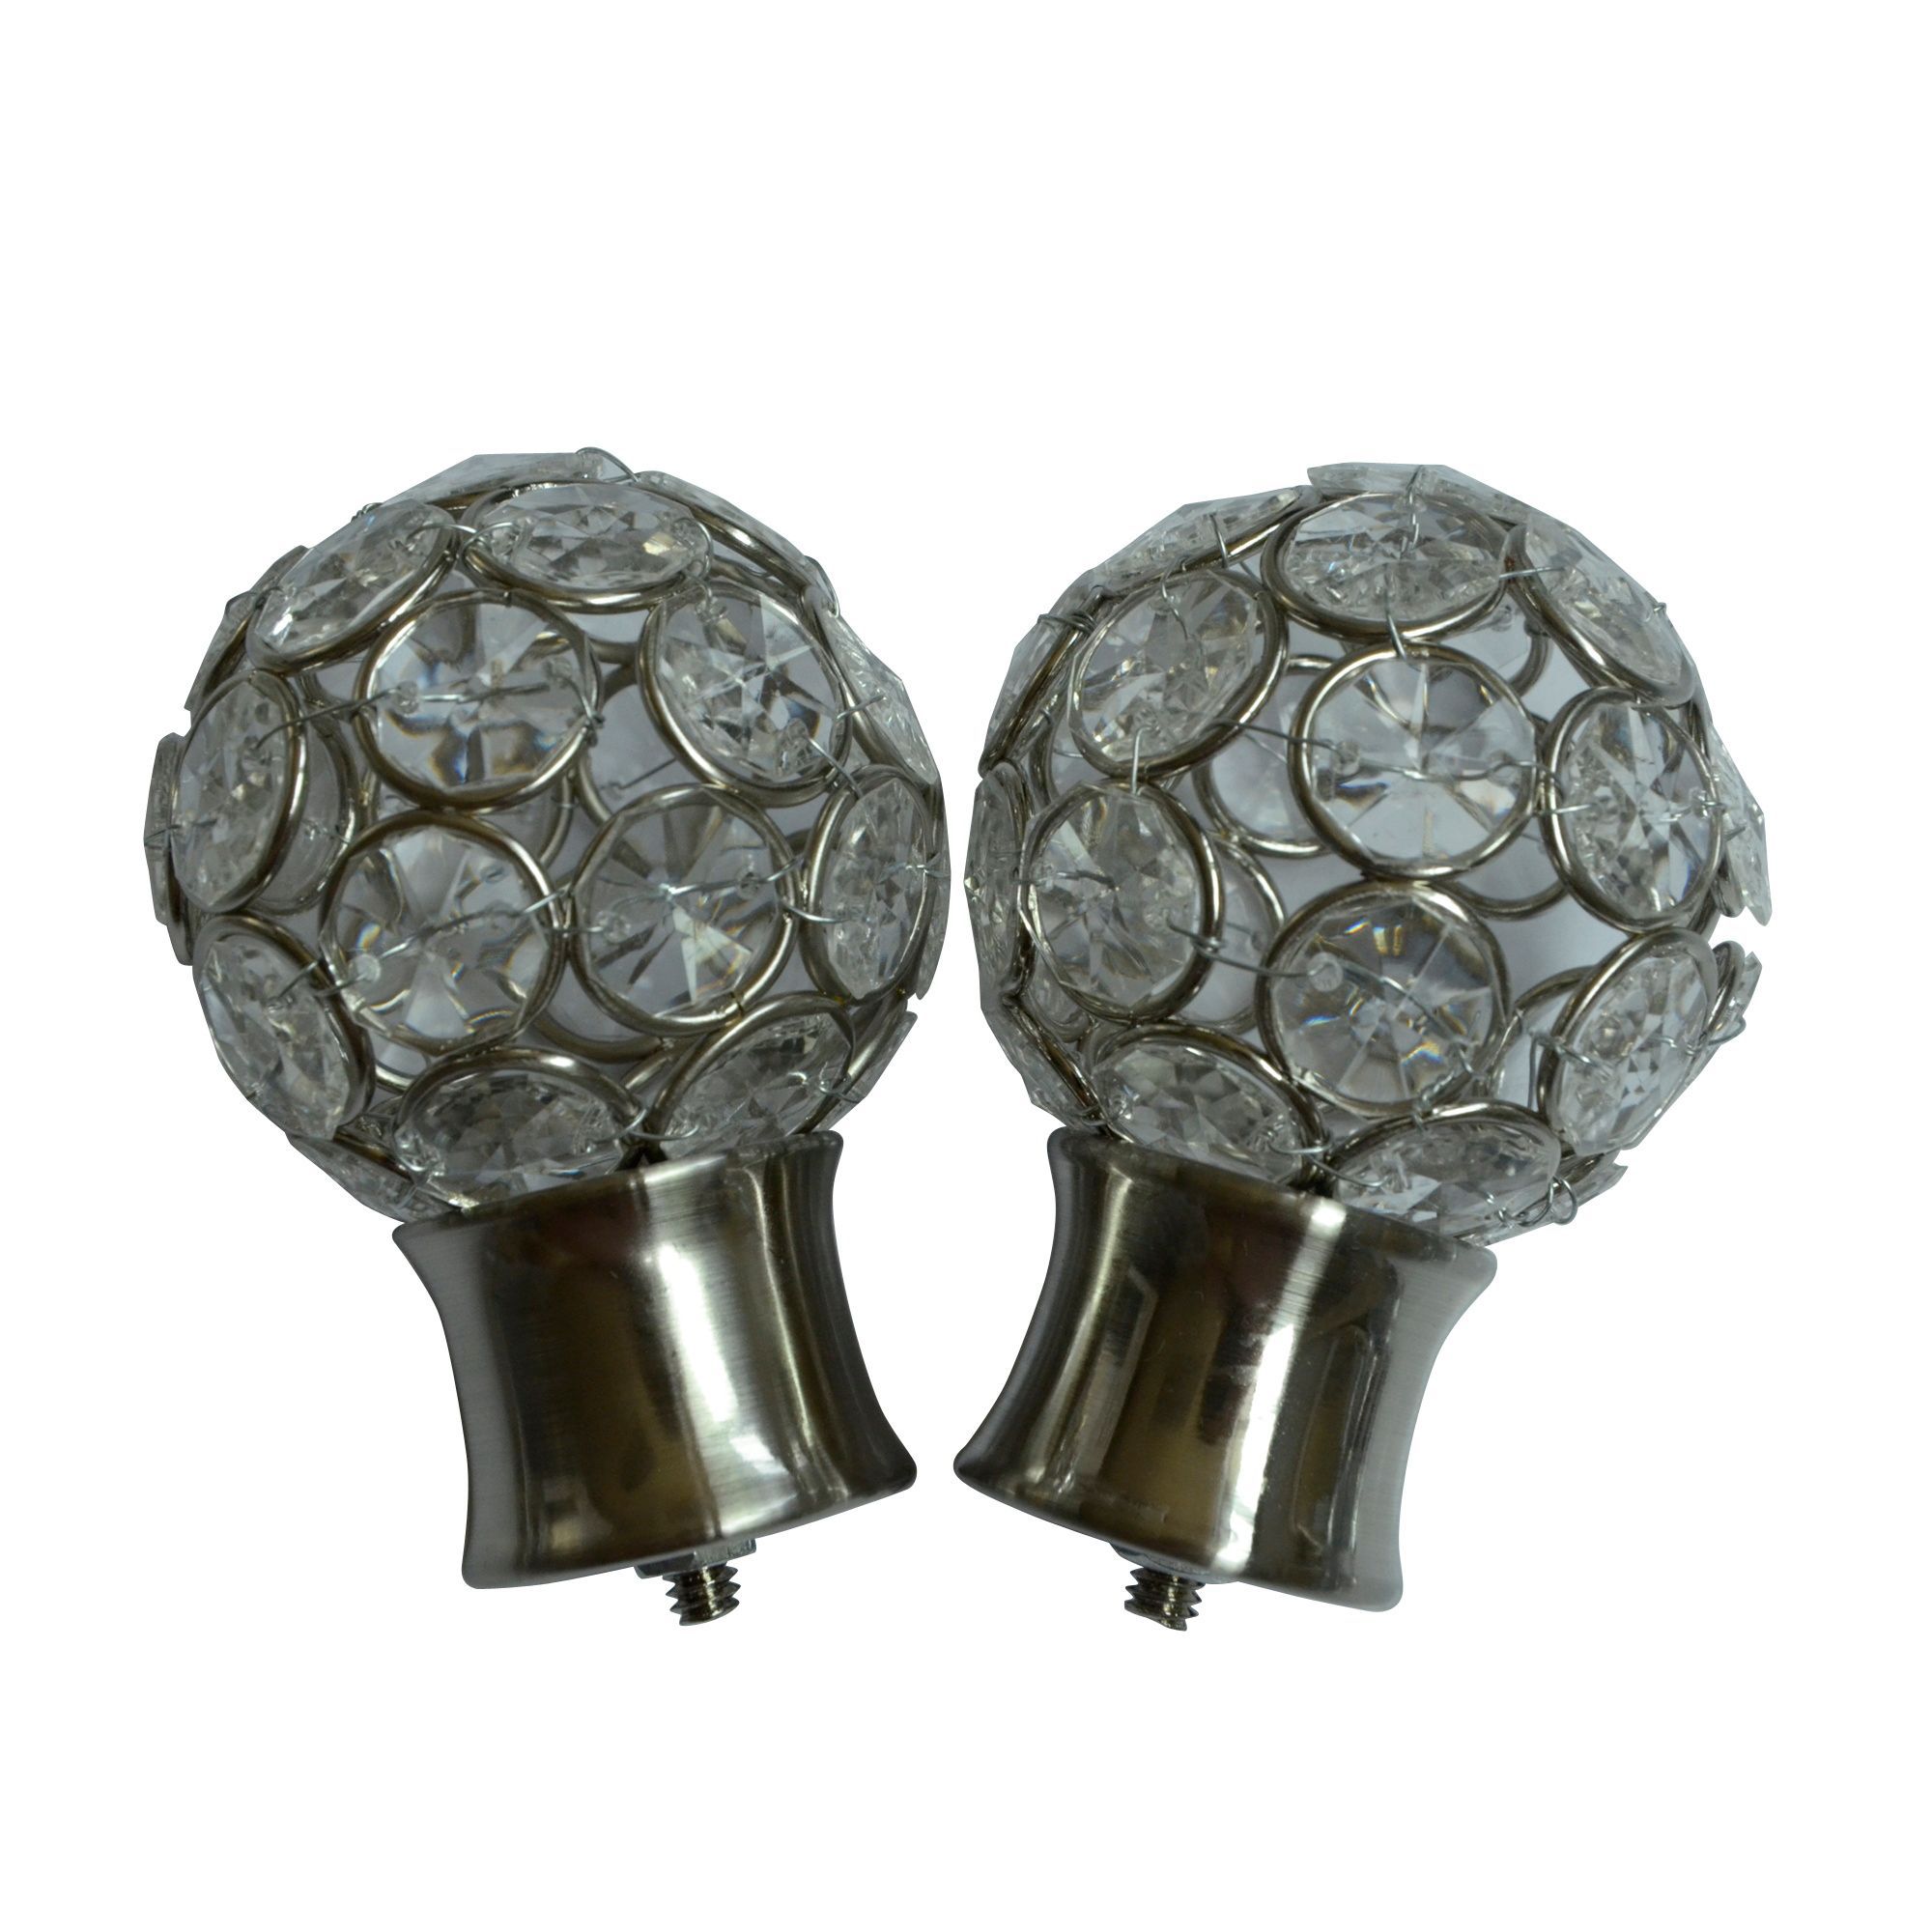 Stainless steel effect Ball Curtain pole finial, Pack of 2